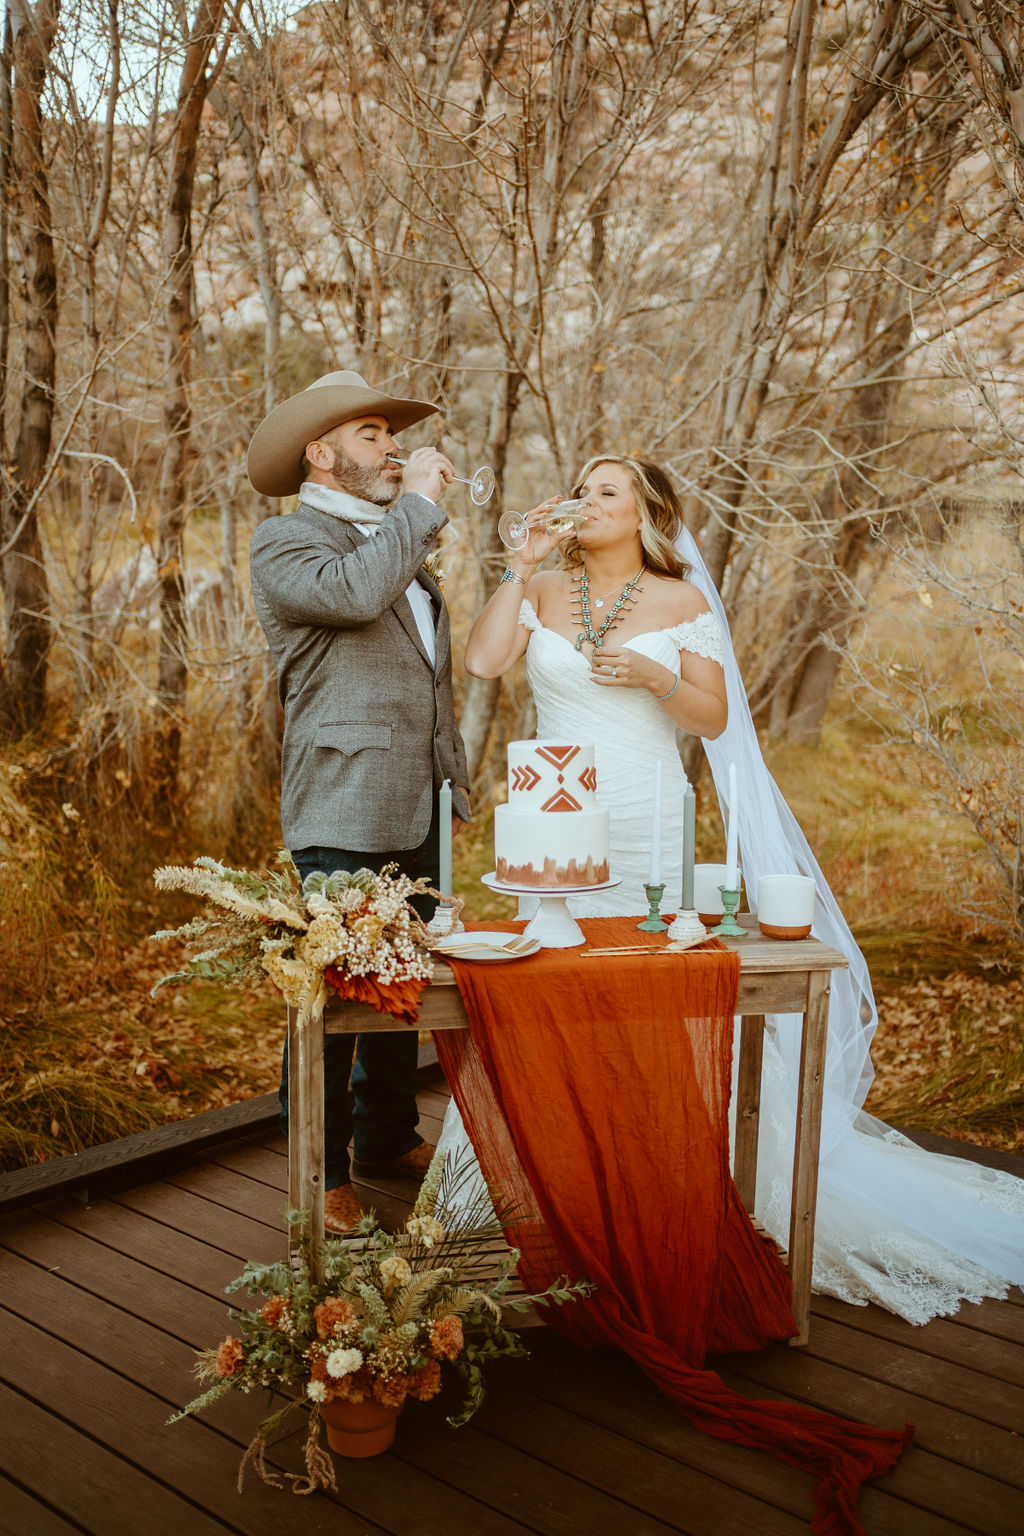 Newlyweds drinking Champagne before Cutting Caking during Western Inspired Turquoise Boho Elopement 